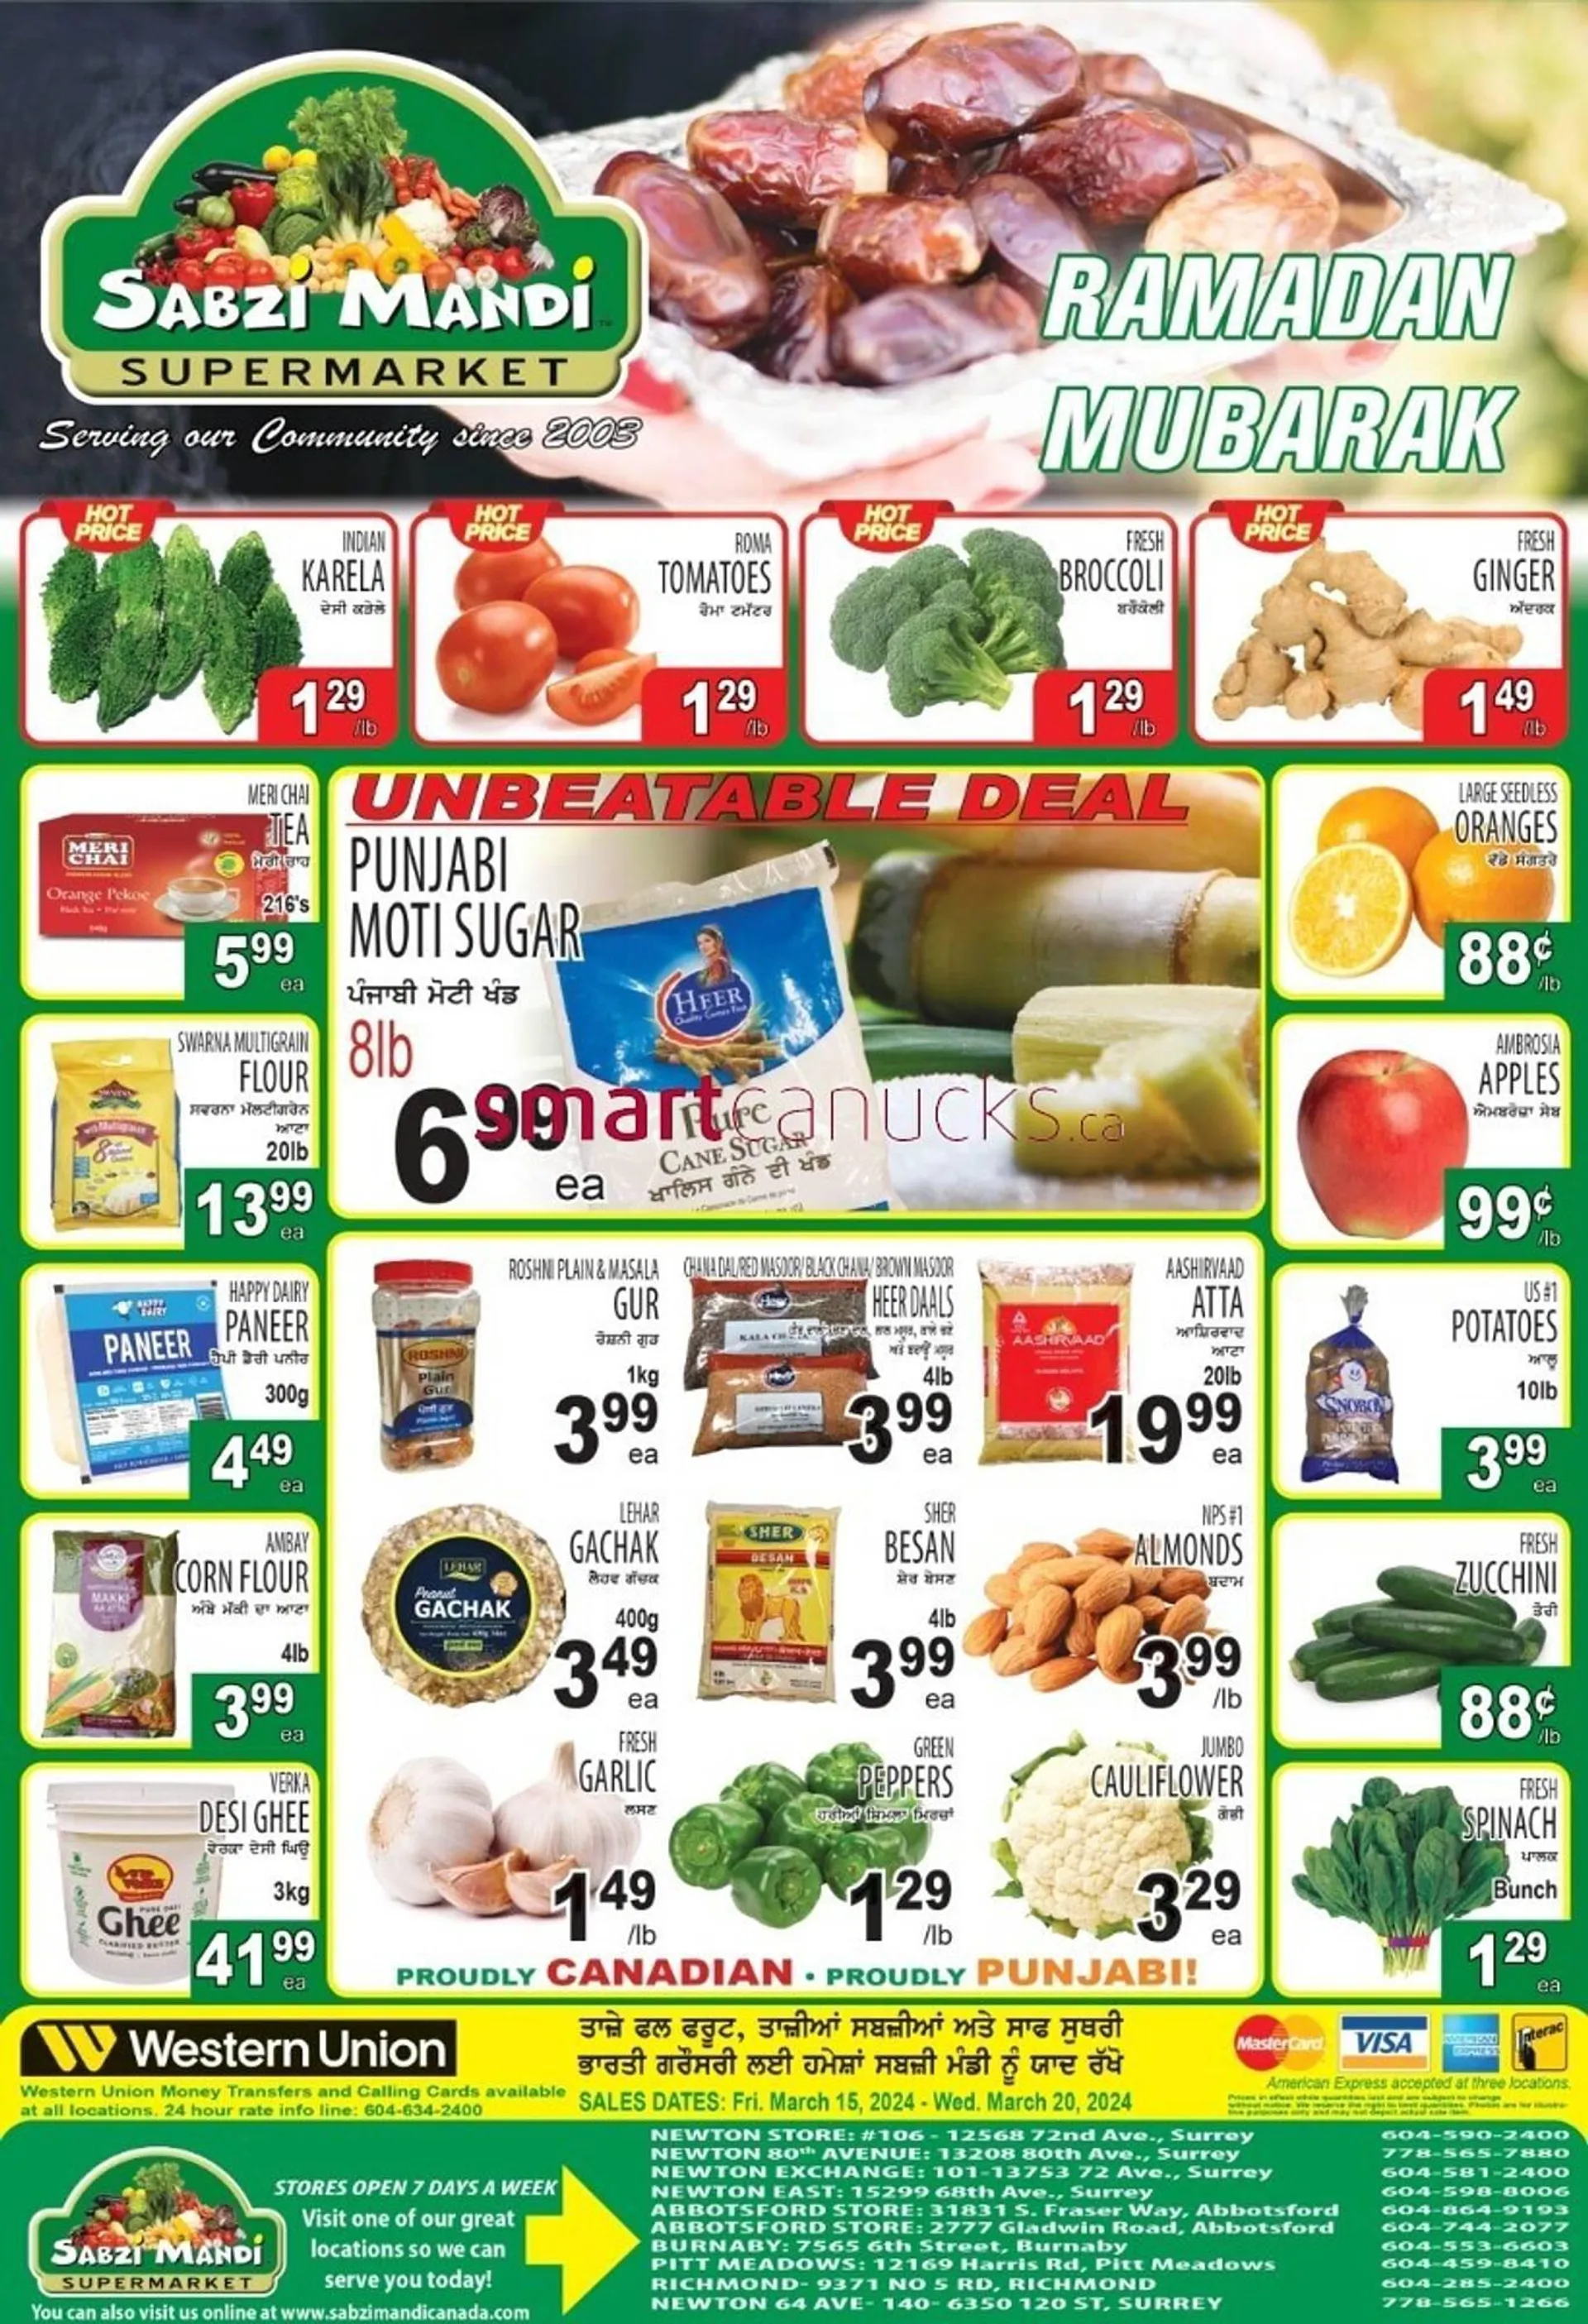 Sabzi Mandi Supermarket flyer from March 15 to March 21 2024 - flyer page 1